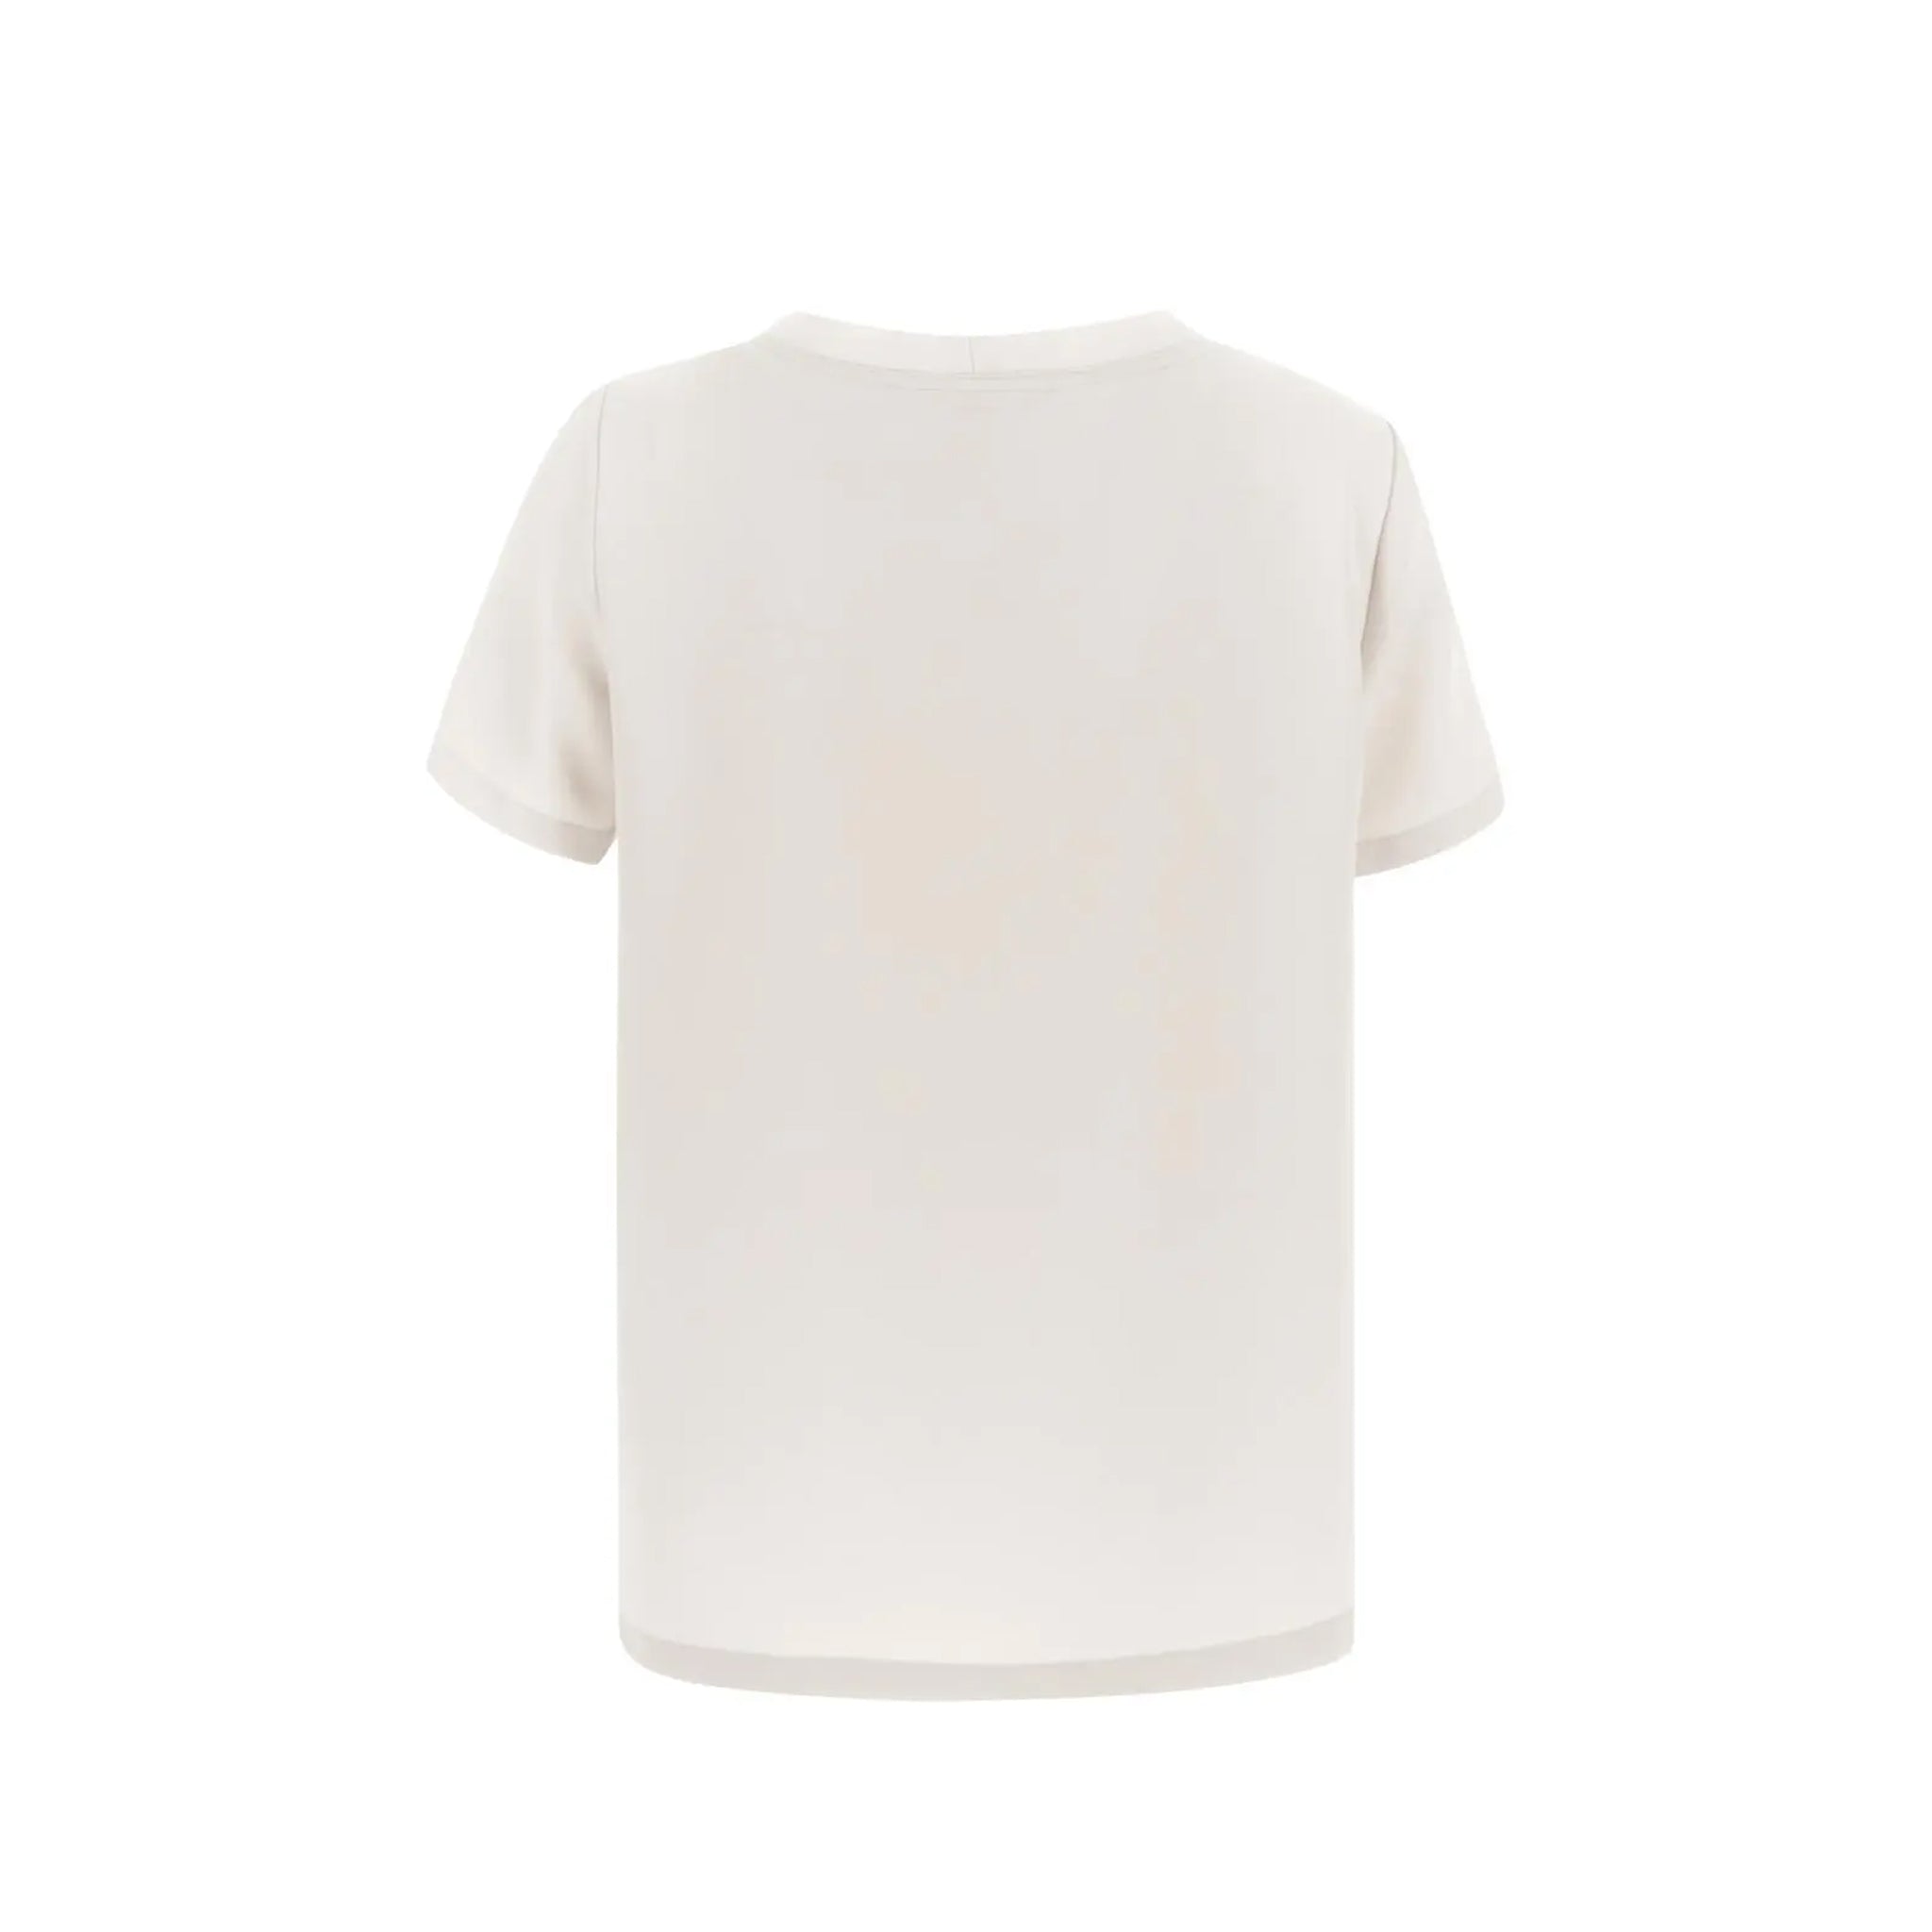 S-MAX-MARA-OUTLET-SALE-s-Max-Mara-Umes-T-Shirt-Shirts-ARCHIVE-COLLECTION-2.jpg